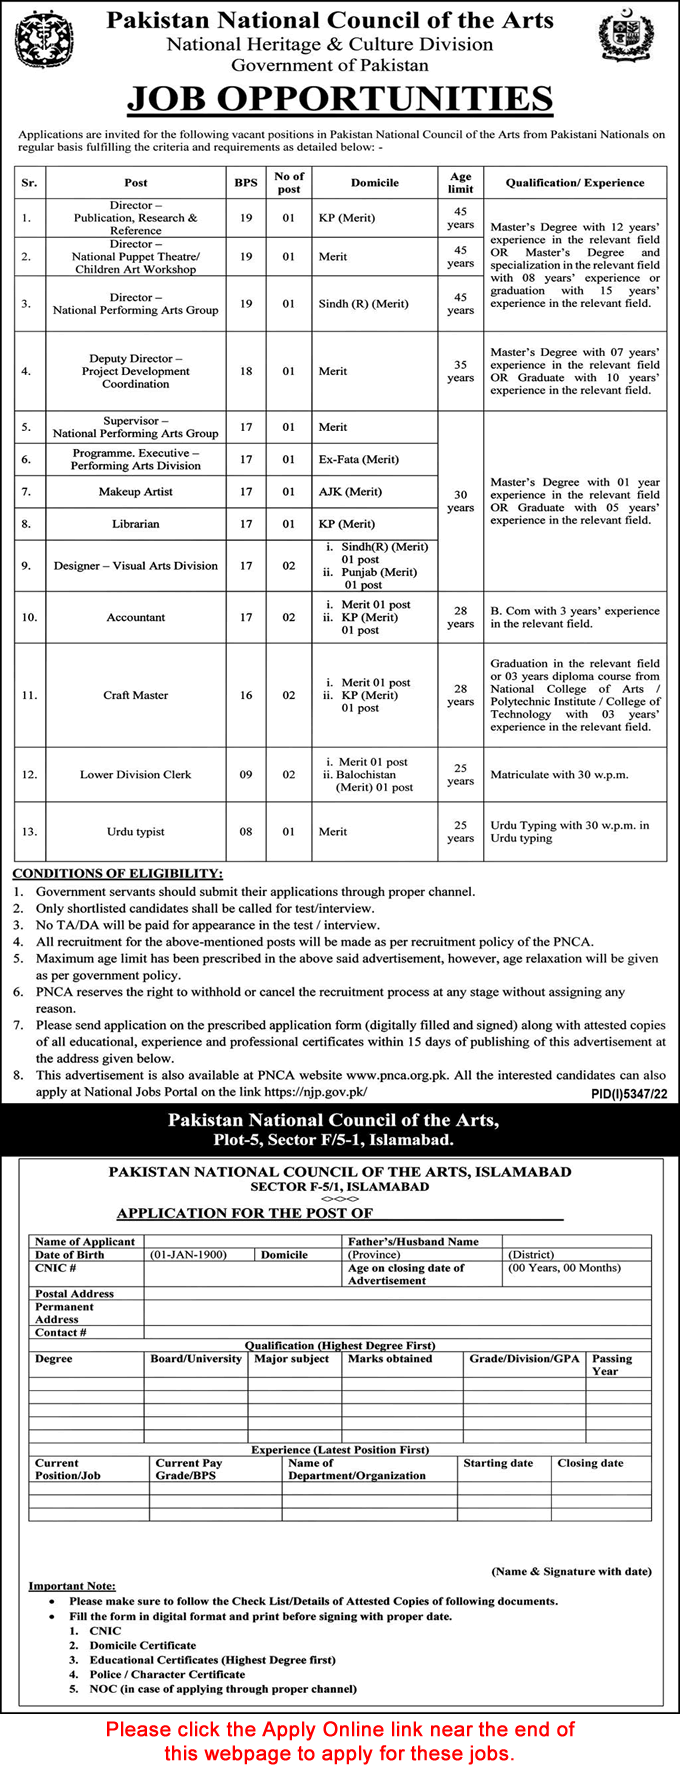 Pakistan National Council of Arts Jobs 2023 March PNCA Apply Online NJP Designers & Others Latest